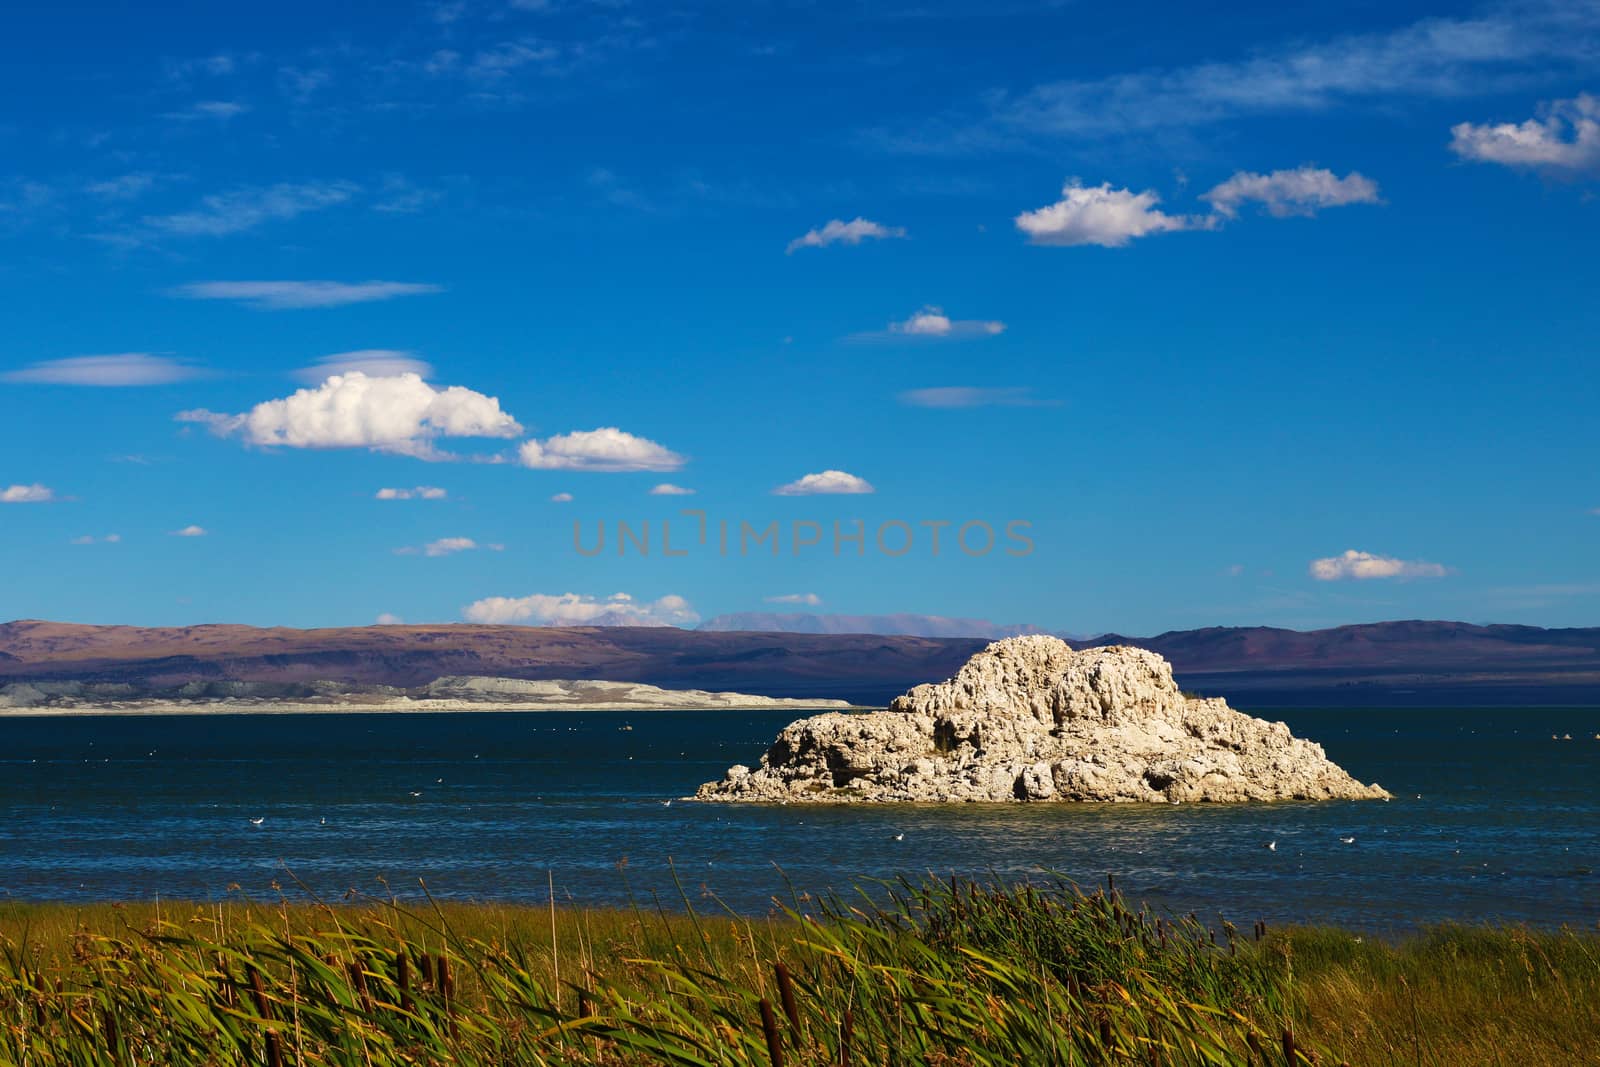 A small forest of tufa rises from the shores of Mono Lake